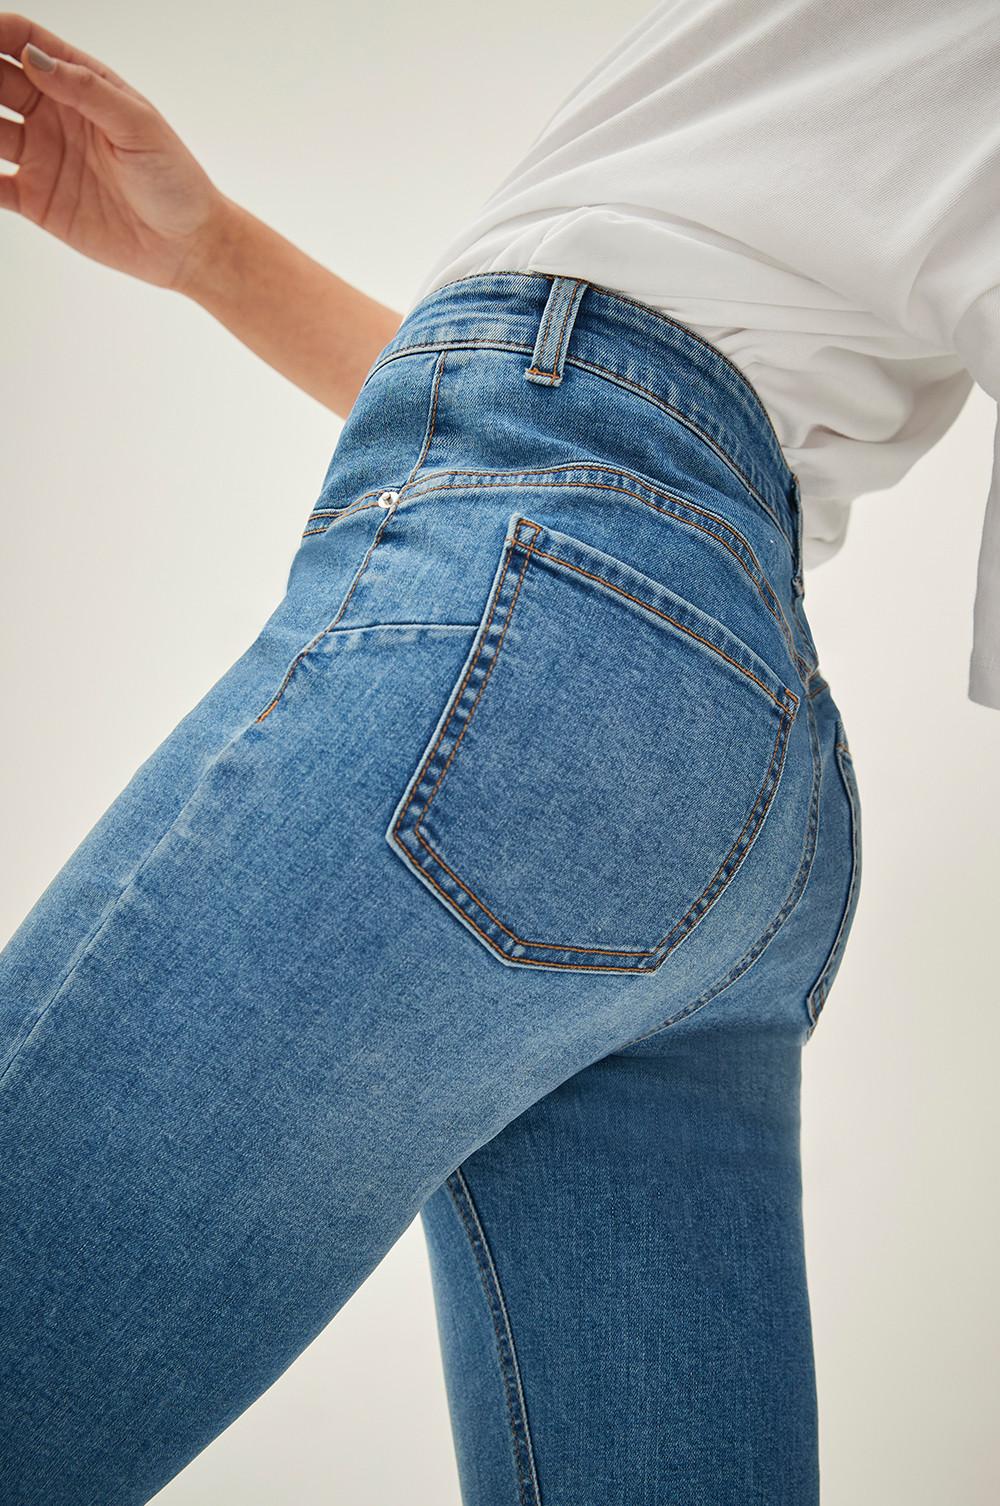 Close up of model wearing jeans